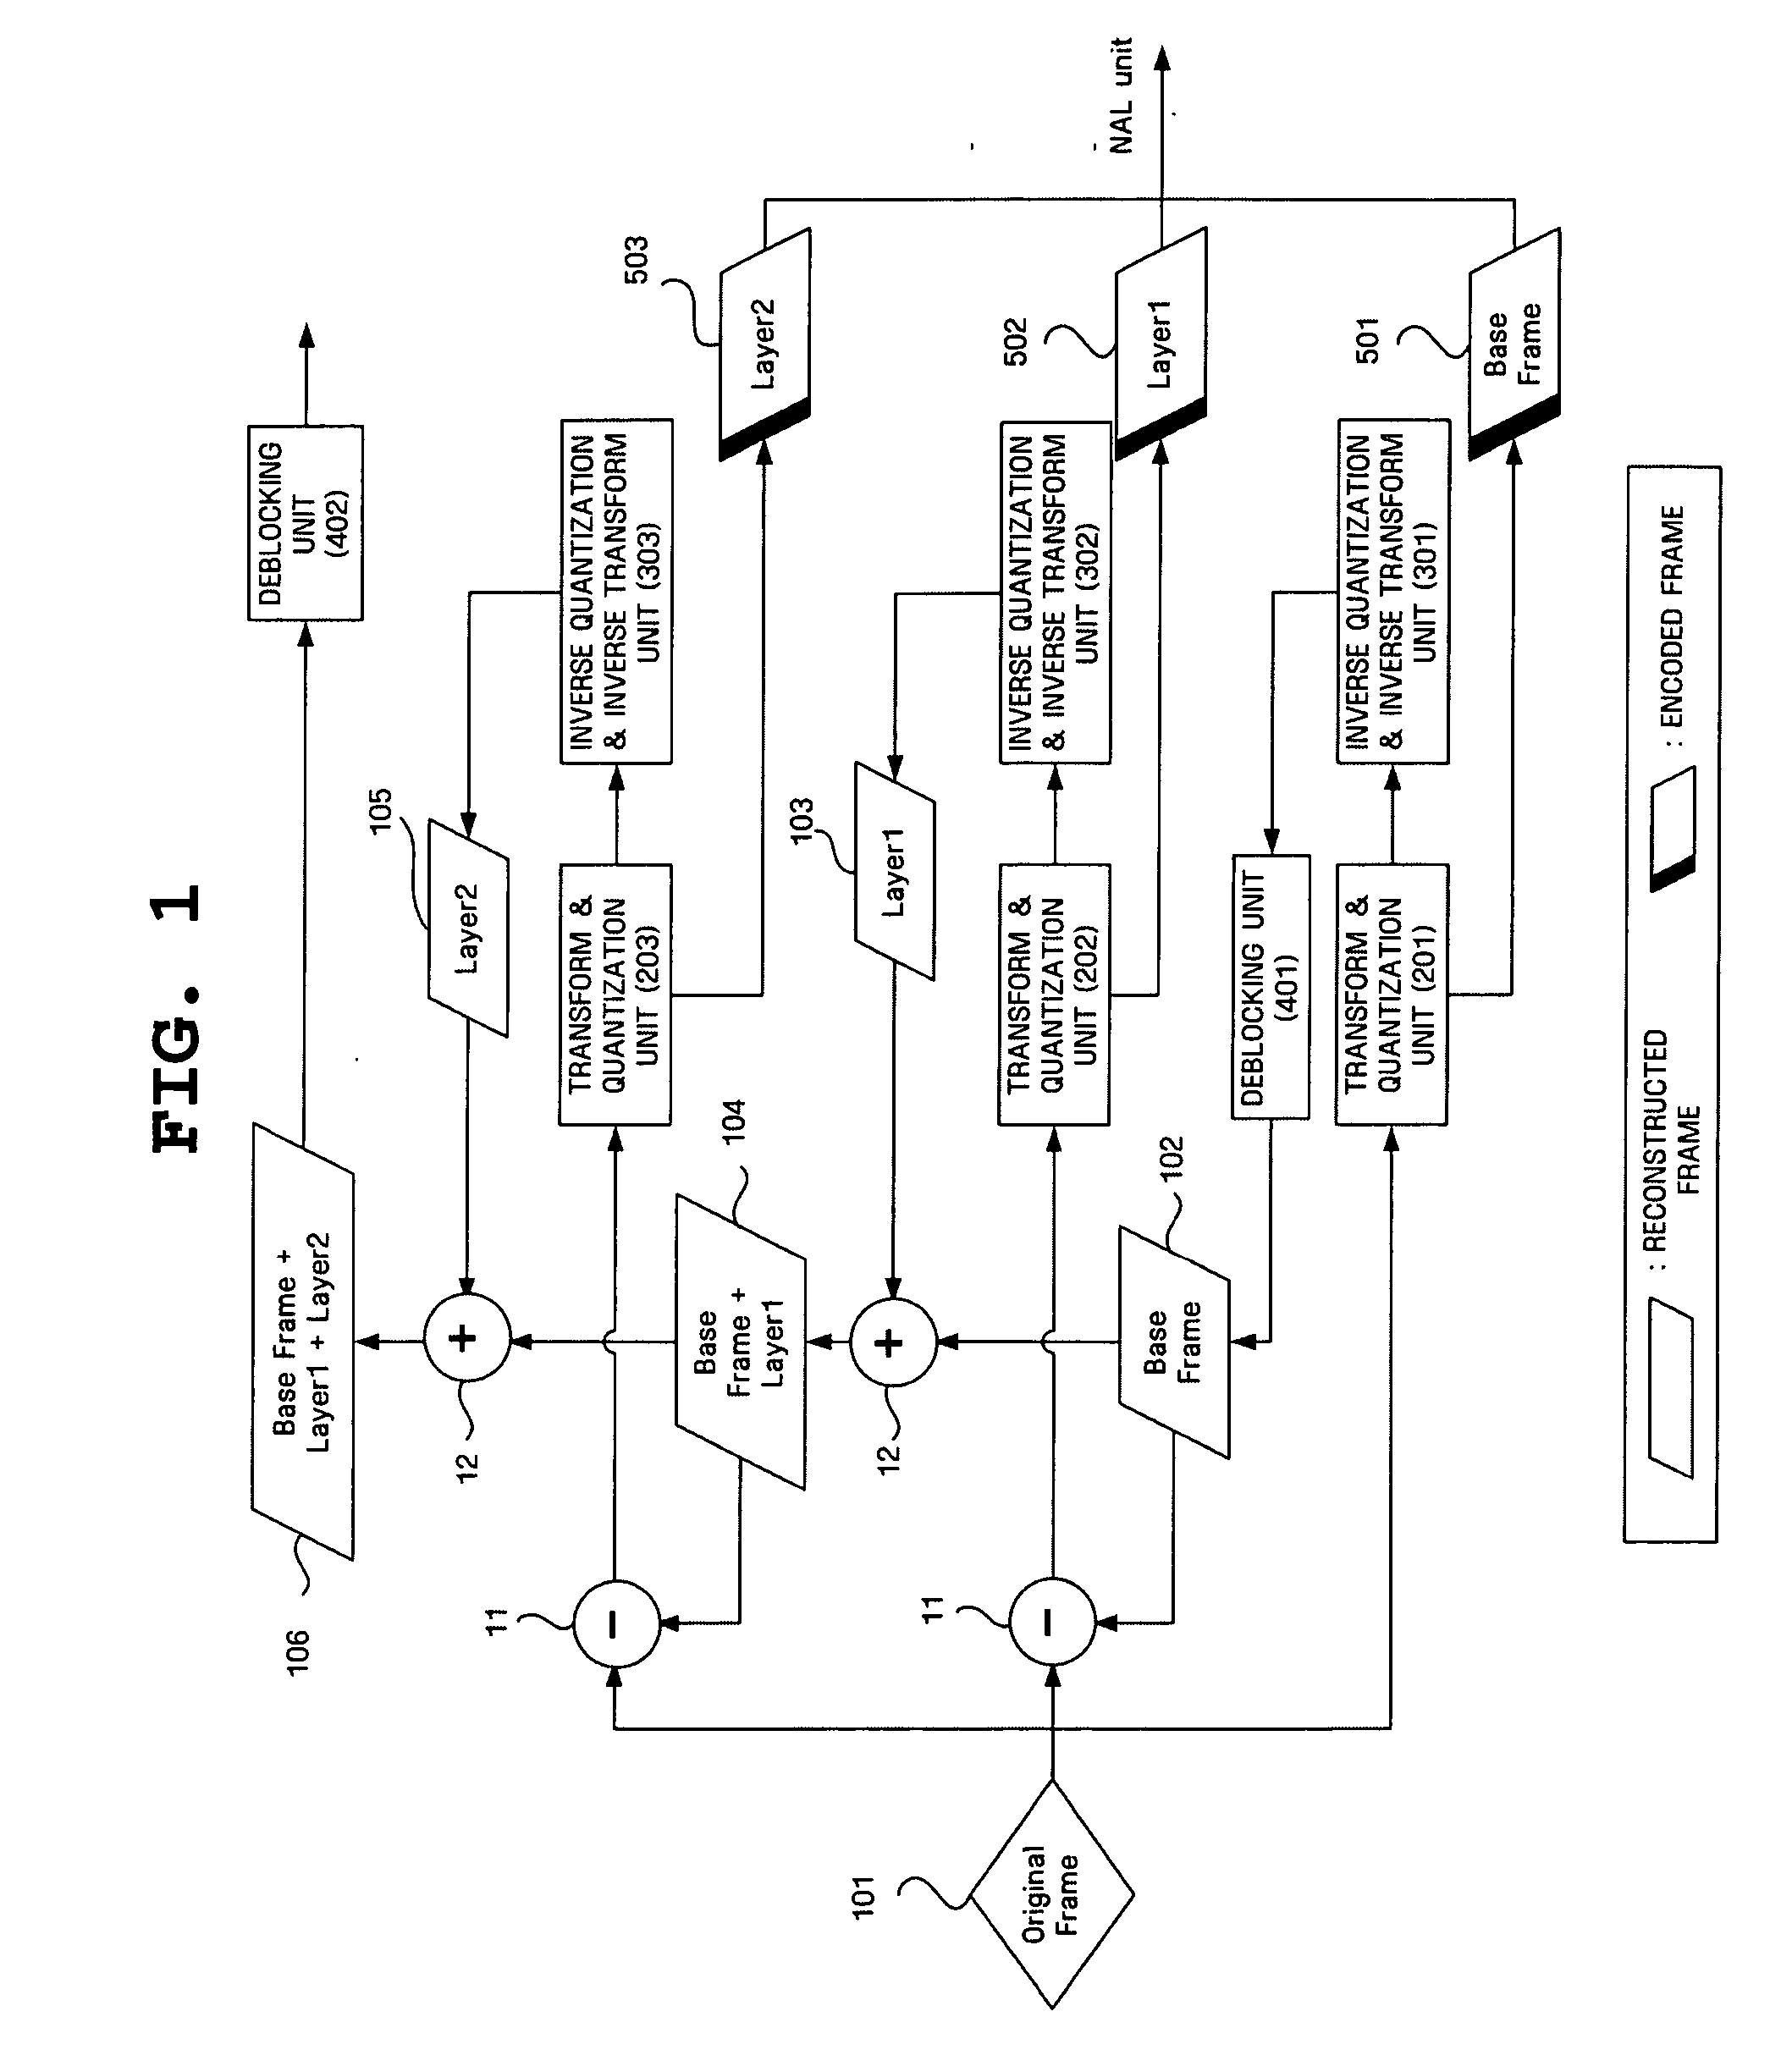 Fine granularity scalable video encoding and decoding method and apparatus capable of controlling deblocking